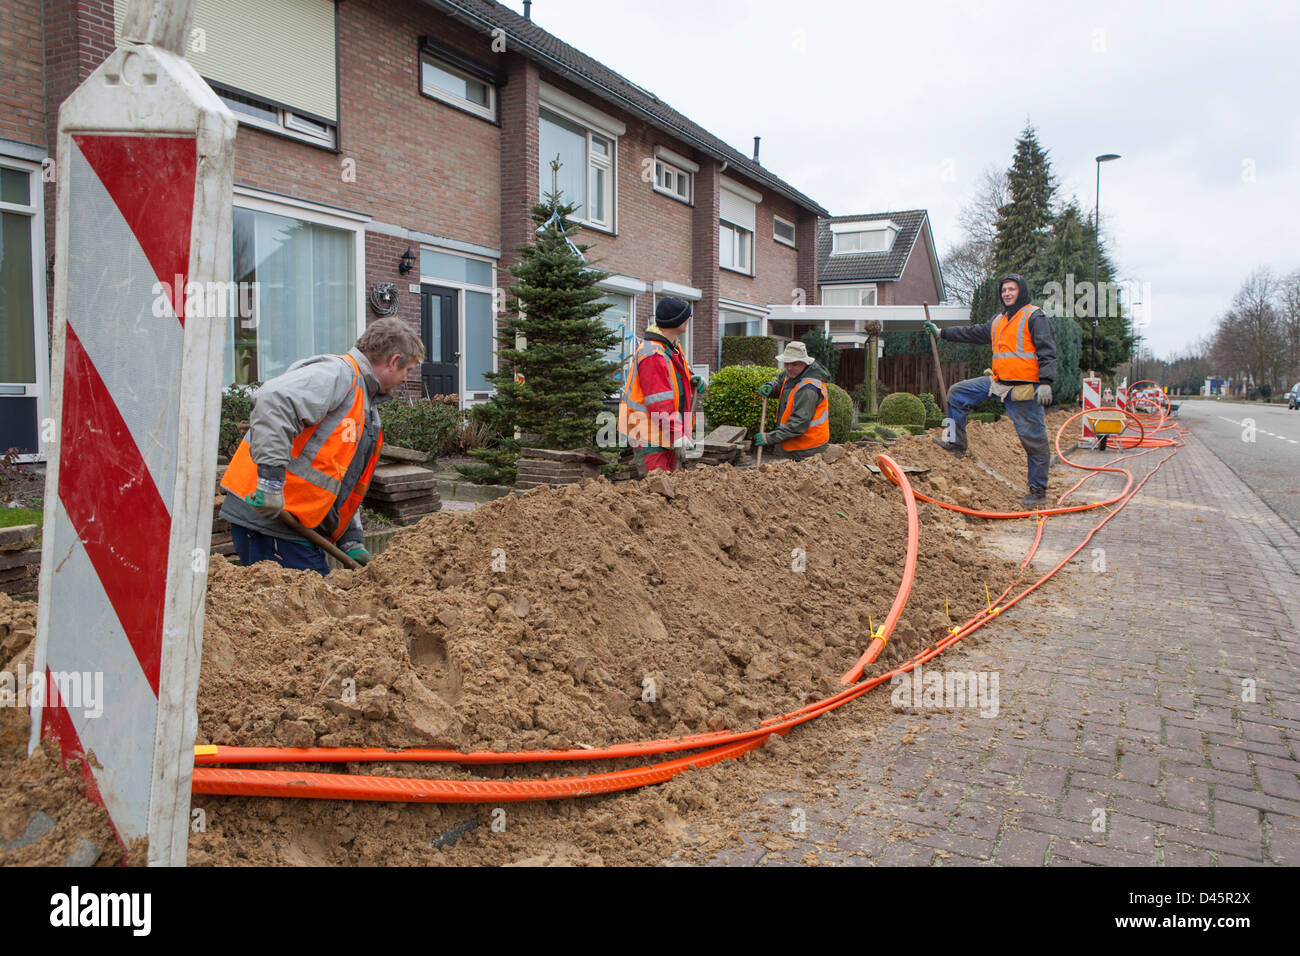 Polish migrant workers do earth work for the construction of a glass fiber infrastructure project in the Netherlands Stock Photo